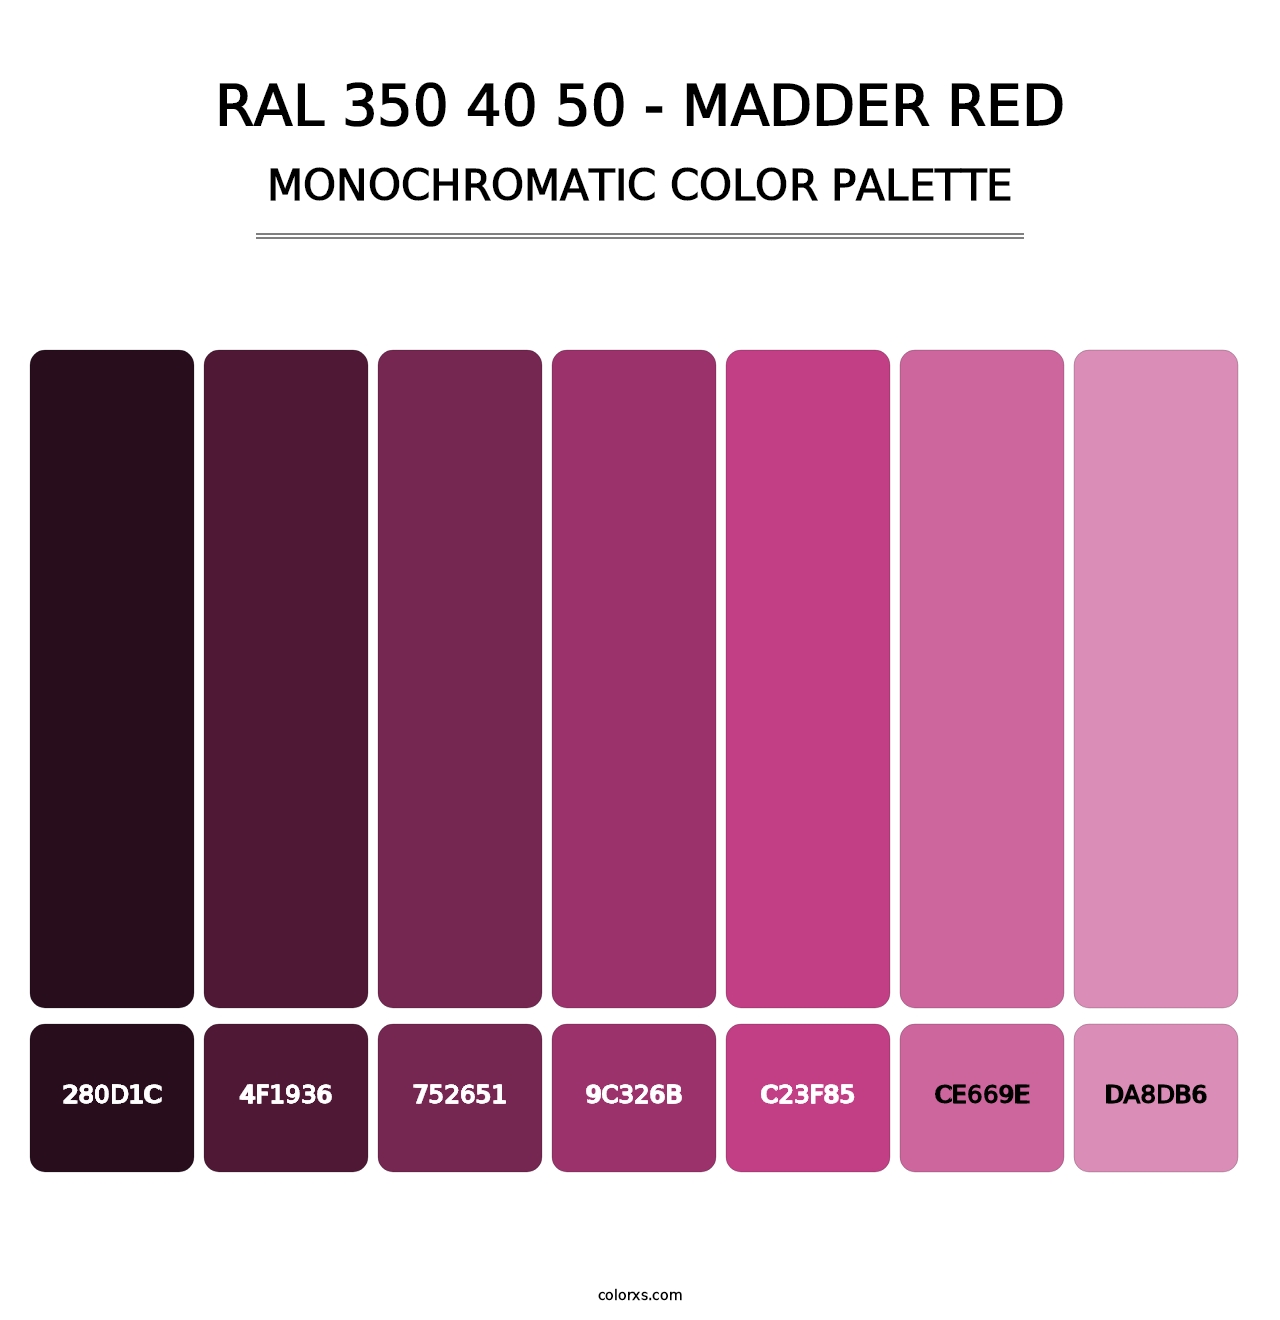 RAL 350 40 50 - Madder Red - Monochromatic Color Palette